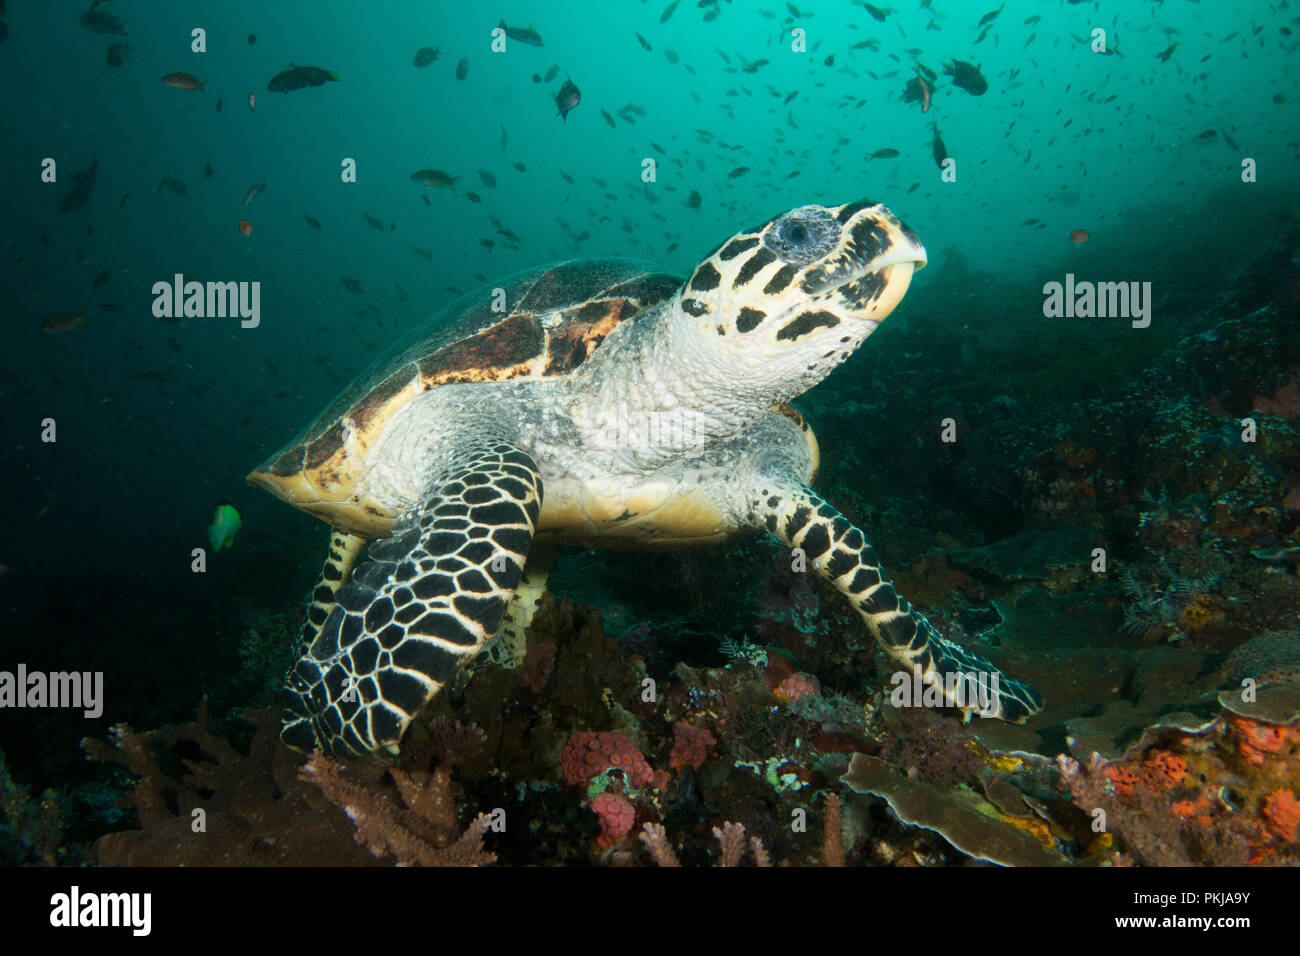 A hawksbill sea turtle - Eretmochelys imbricata - on the coral reef. Taken in Komodo National Park, Indonesia. Stock Photo